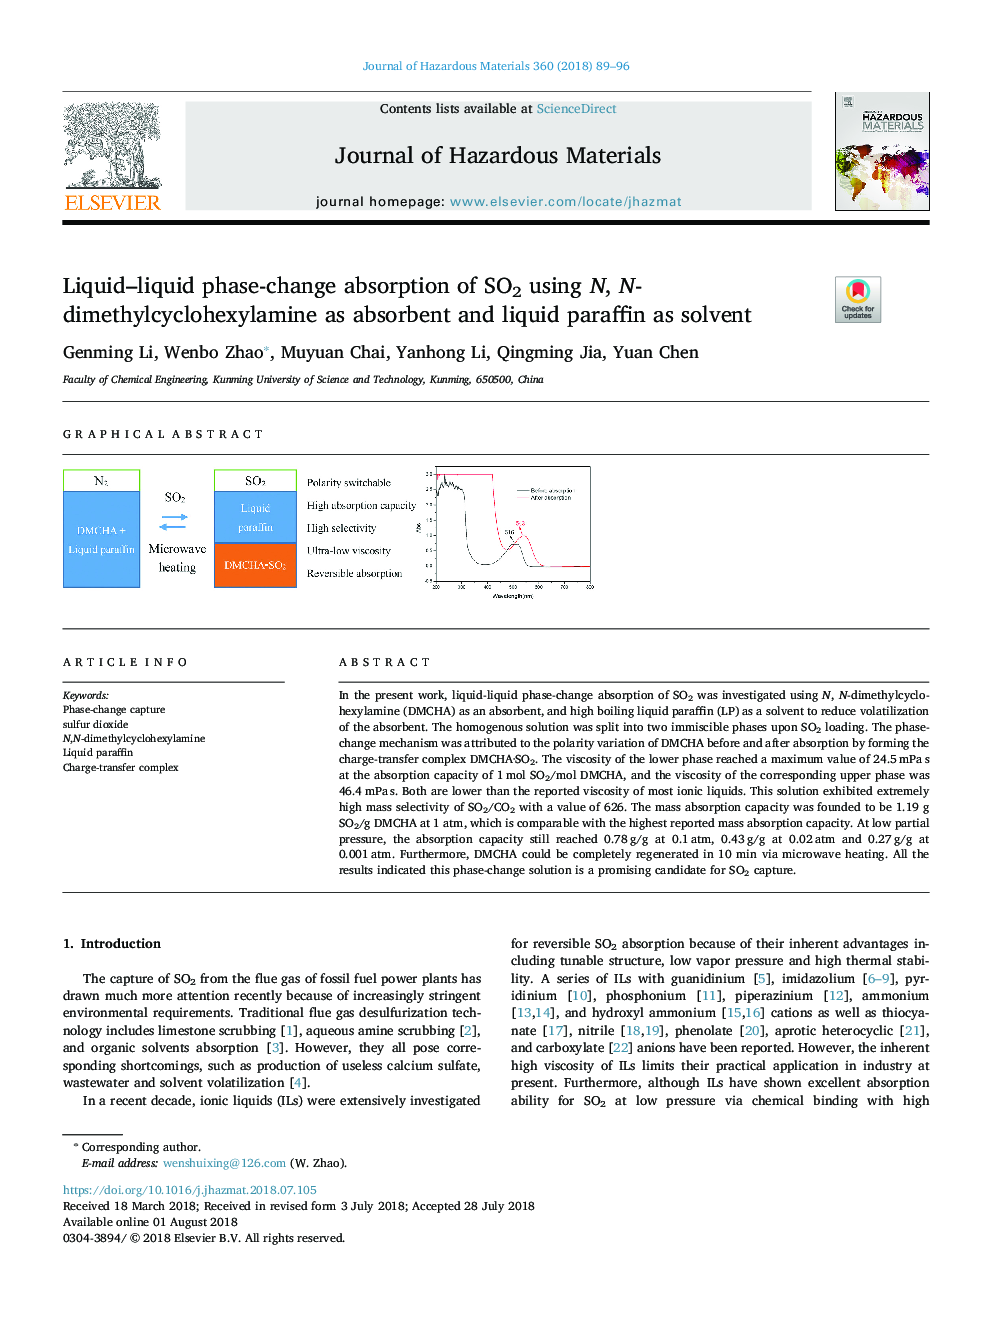 Liquid-liquid phase-change absorption of SO2 using N, N-dimethylcyclohexylamine as absorbent and liquid paraffin as solvent